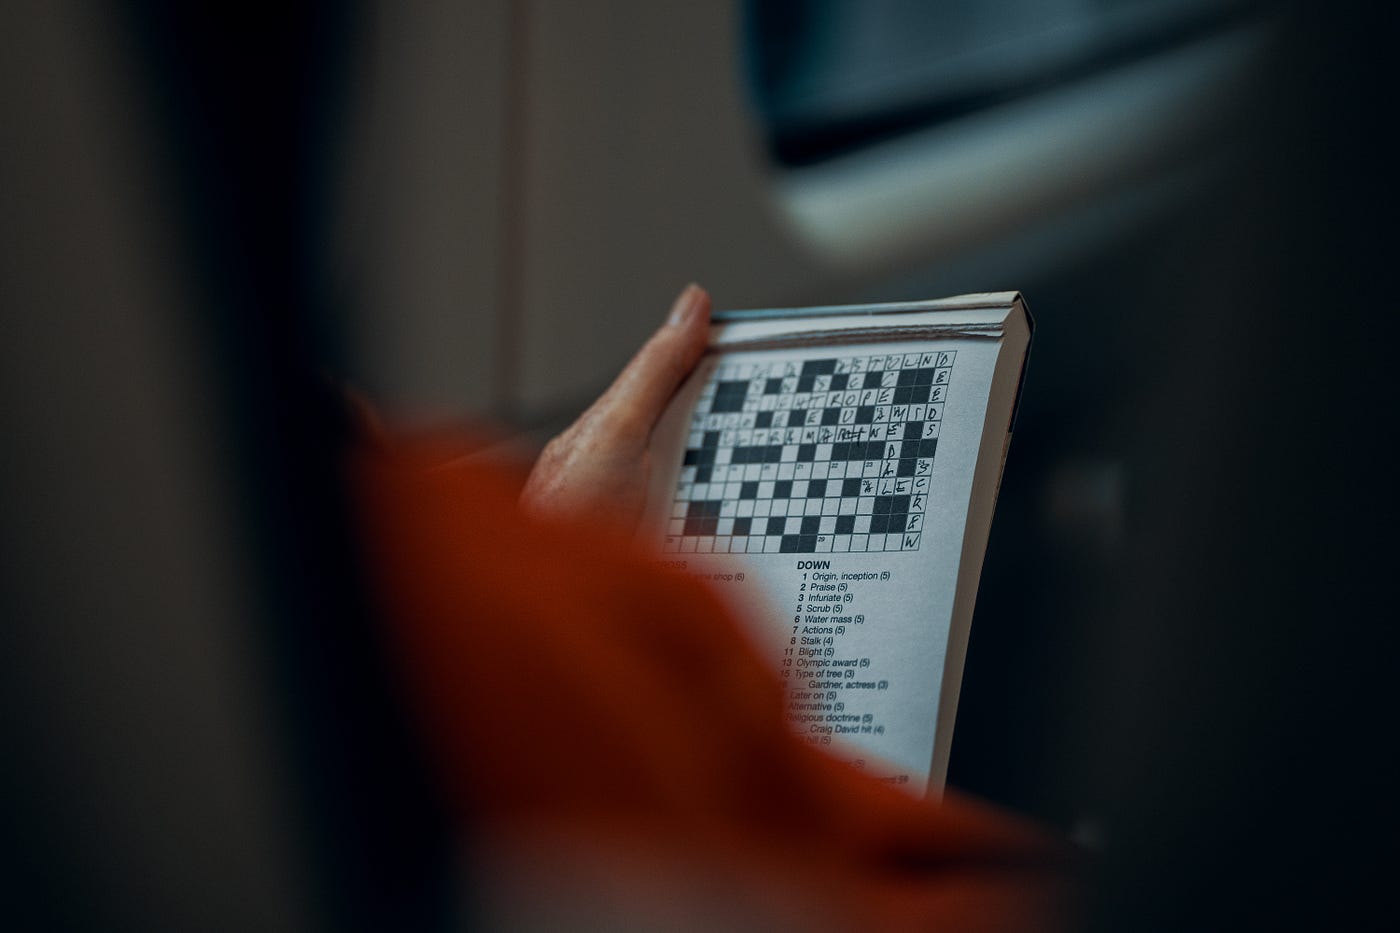 Cryptic crossword hacks — the lift and separate, by kitdenerley